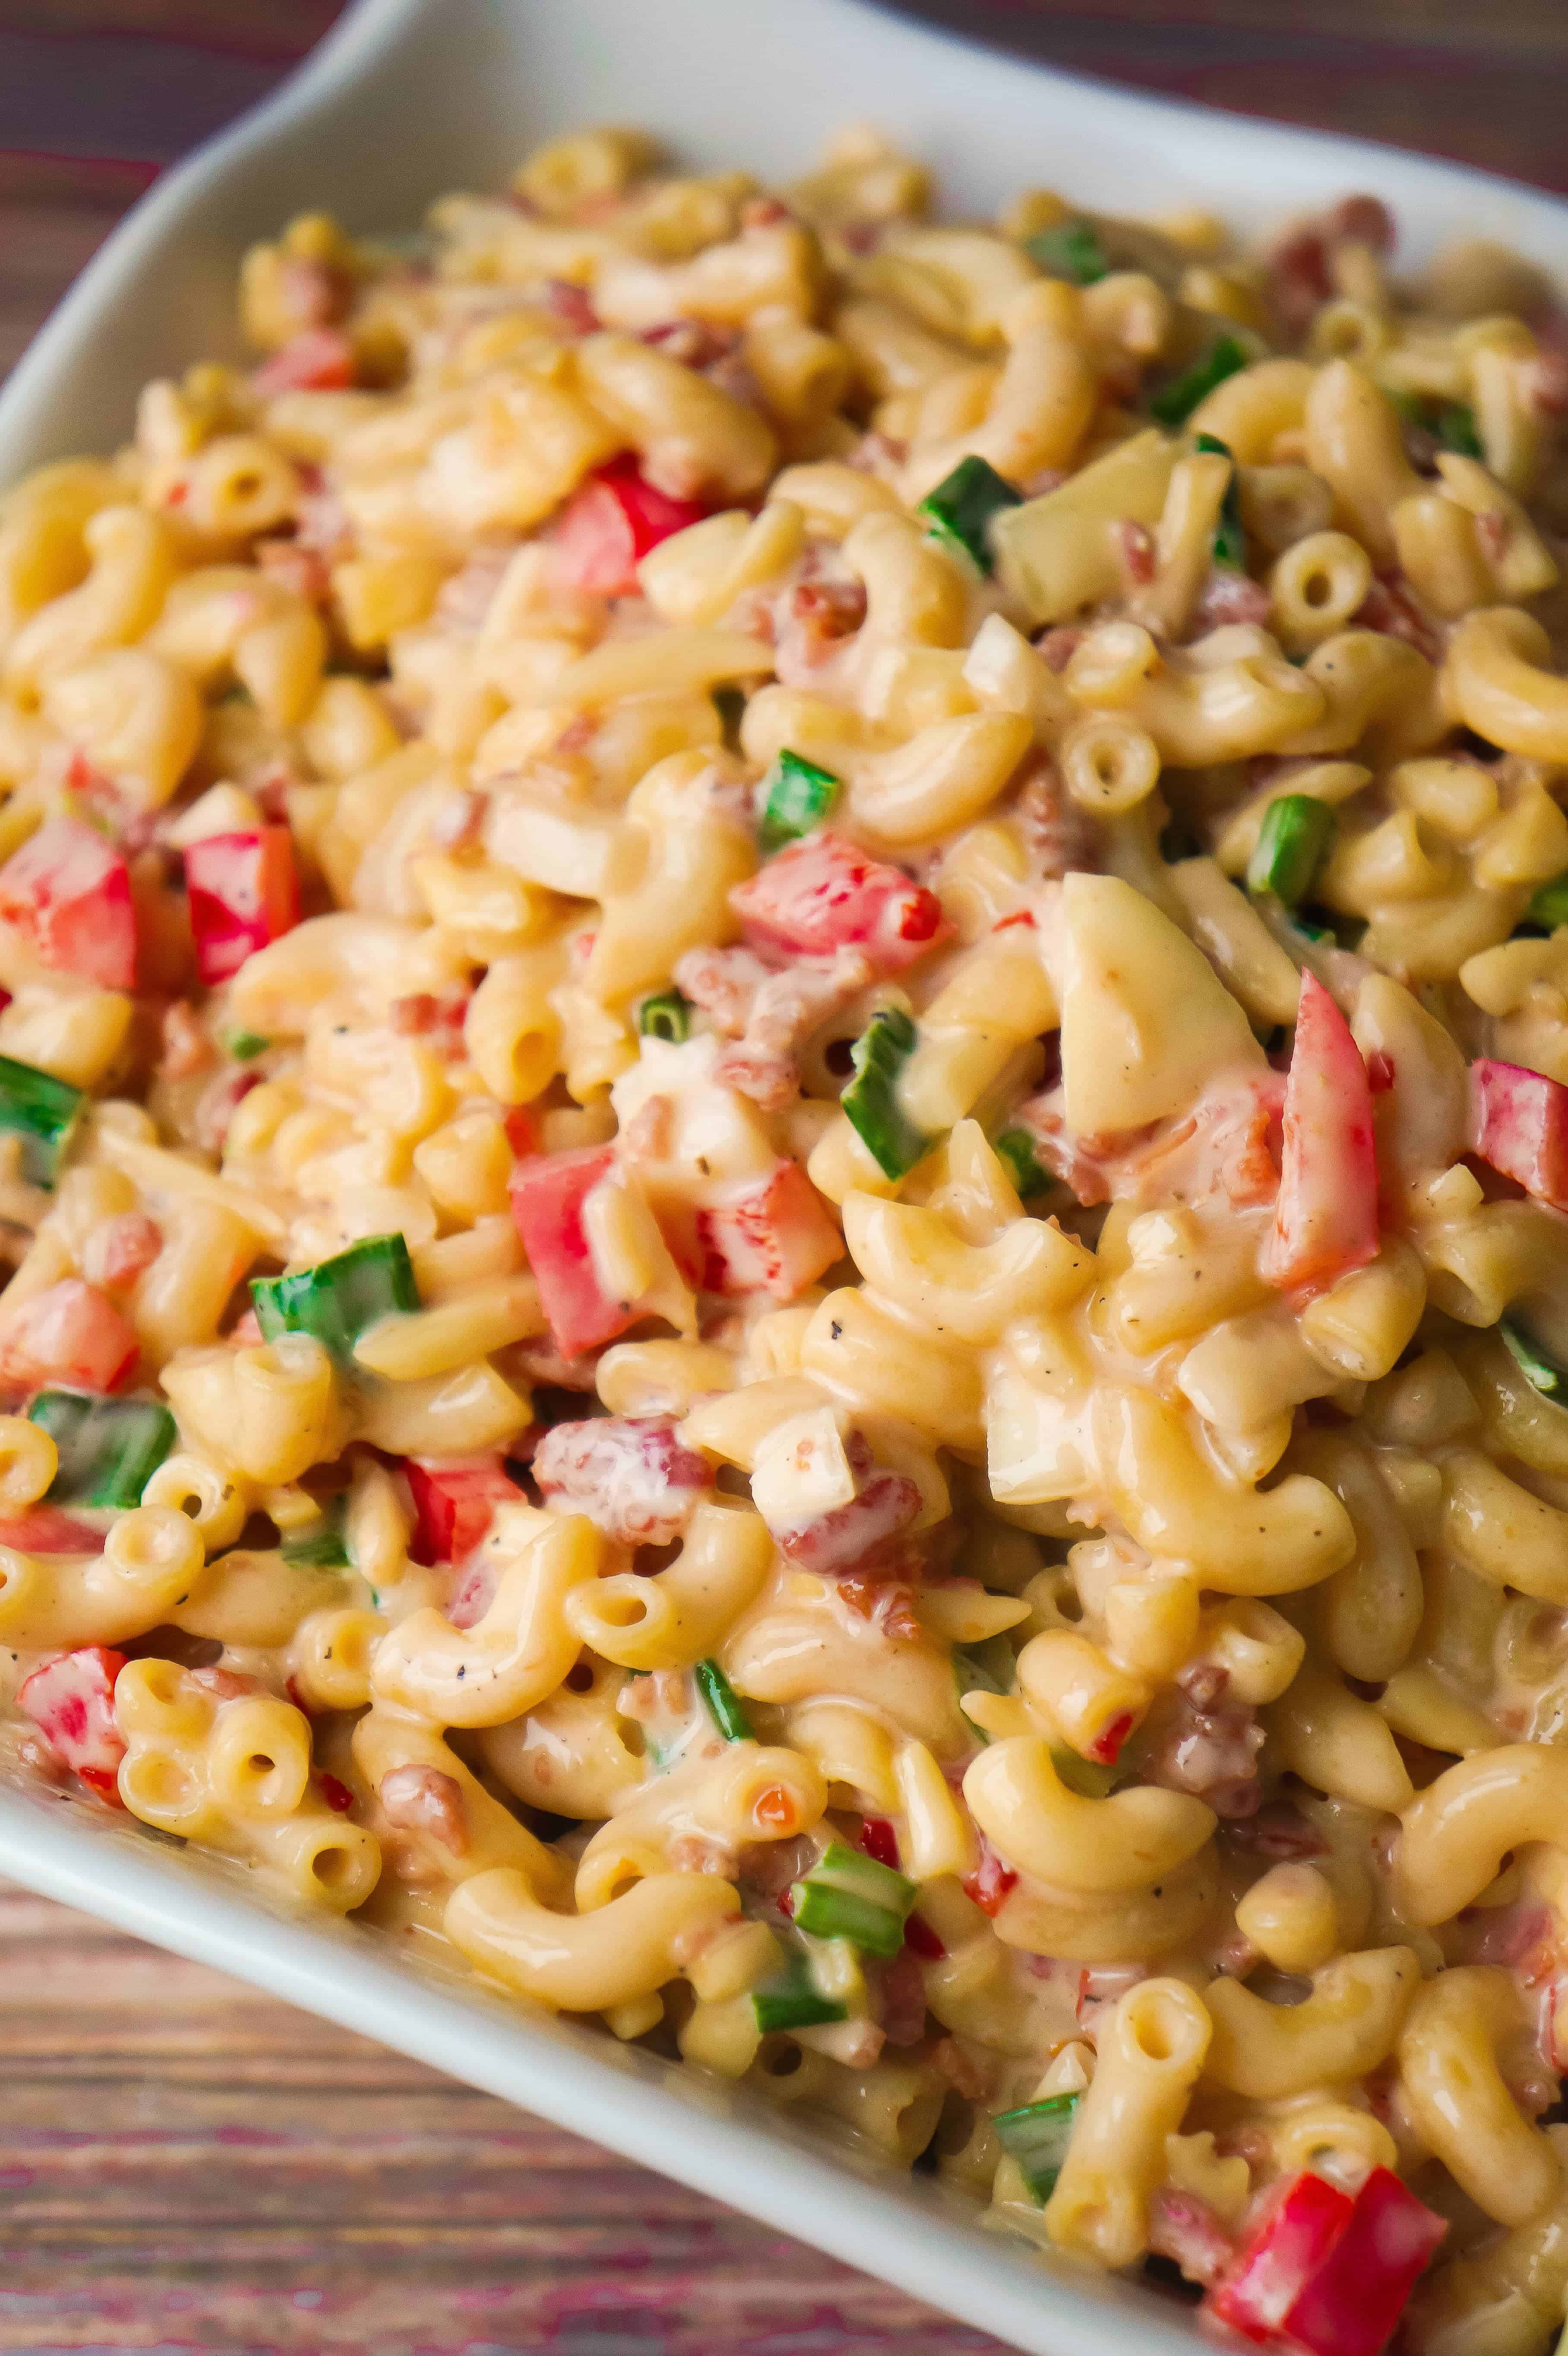 Sweet Chili Bacon Pasta Salad is the perfect side dish for potluck parties. This cold macaroni salad loaded with bacon, red peppers and green onions is tossed in a sweet and spicy sauce. This is an easy BBQ side dish recipe.